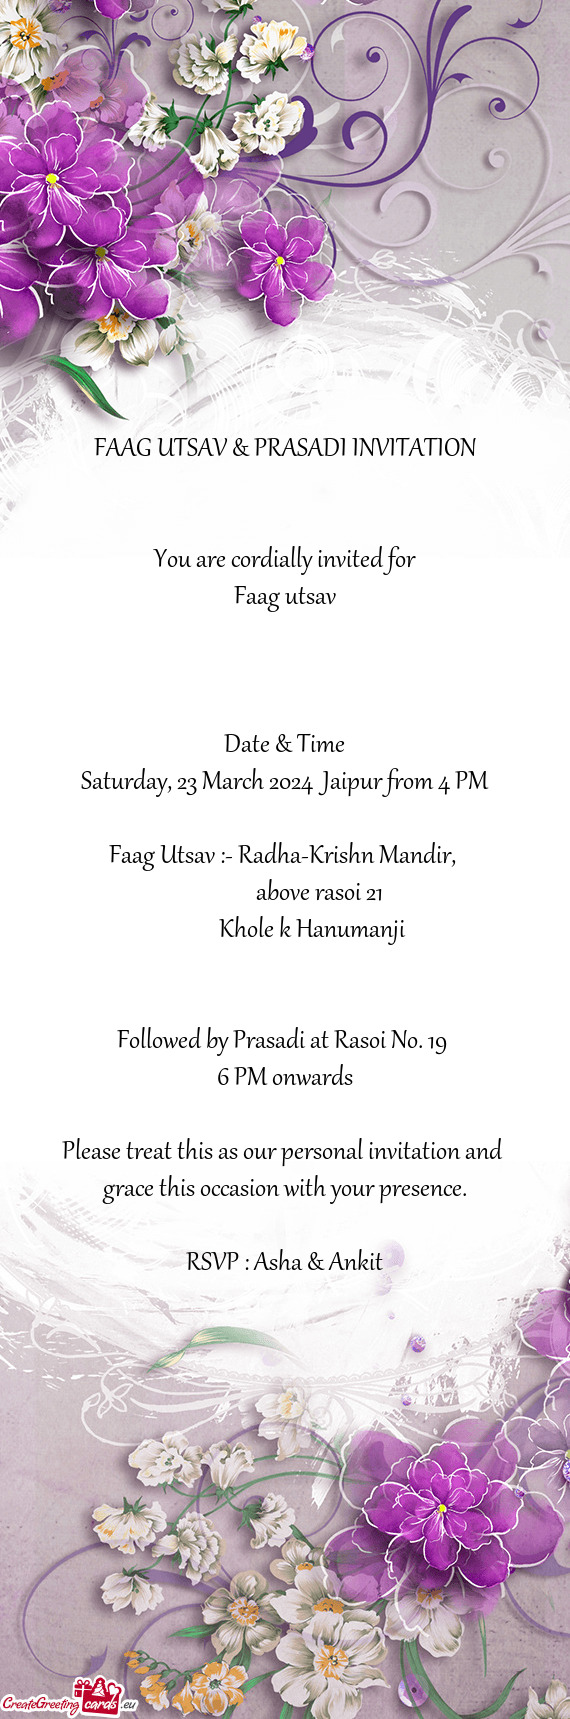 Saturday, 23 March 2024 Jaipur from 4 PM